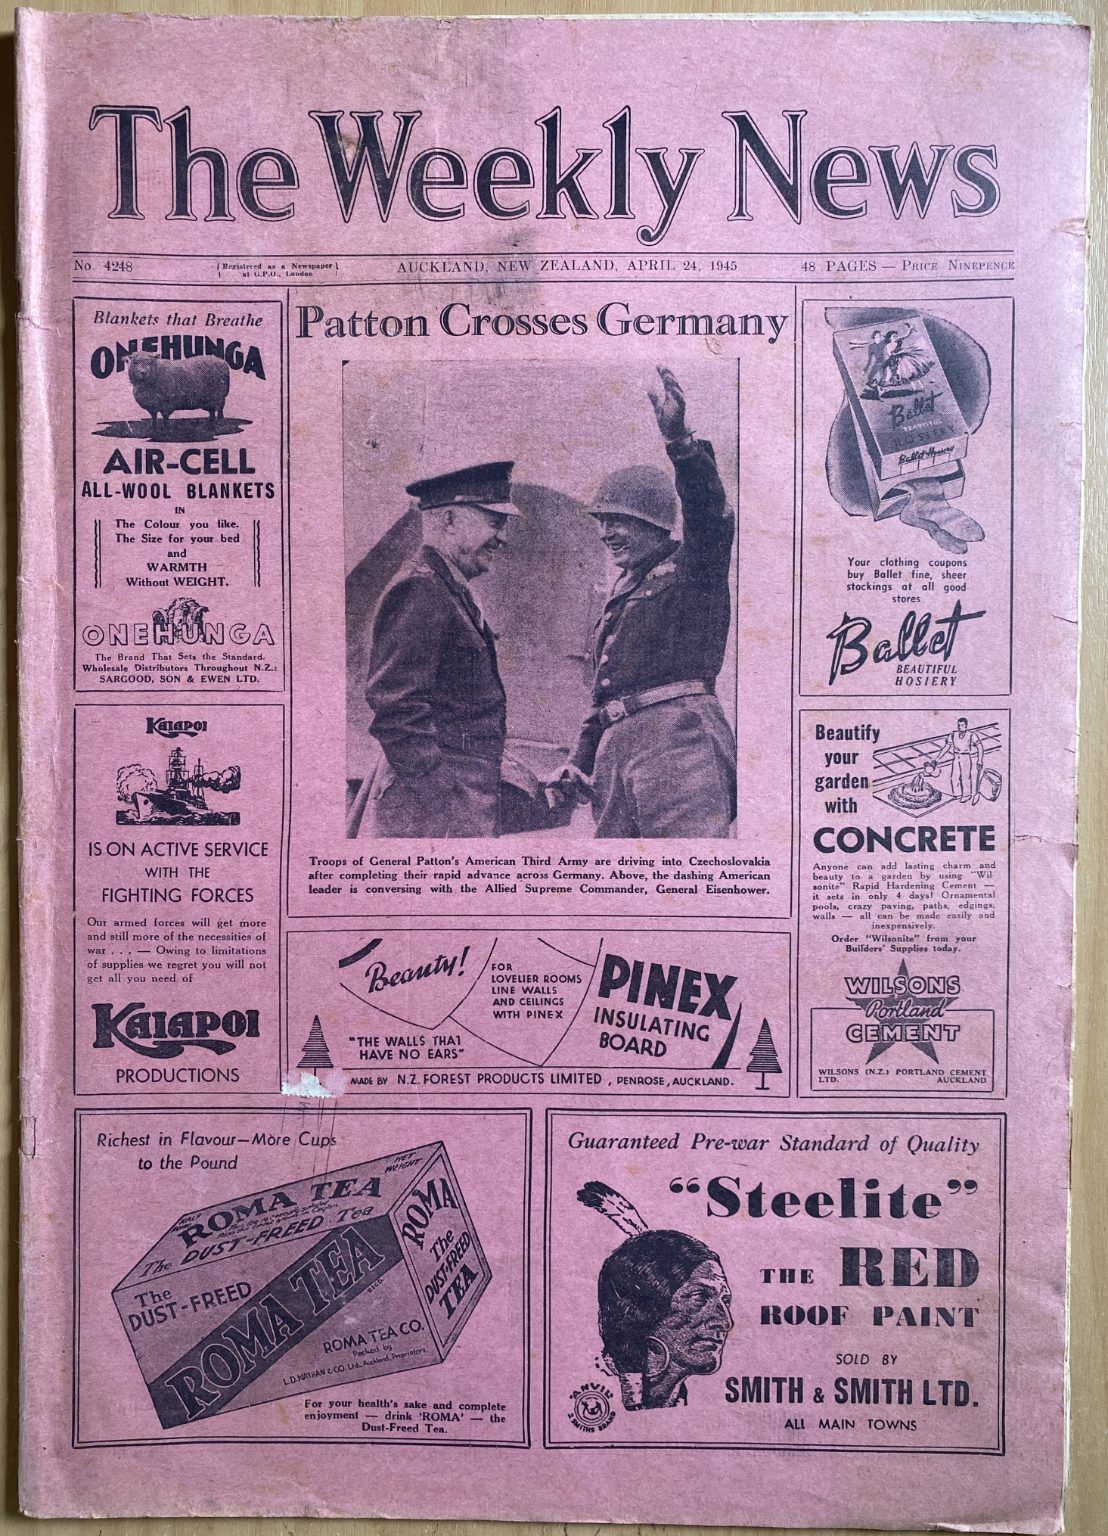 OLD NEWSPAPER: The Weekly News - No. 4248, 24 April 1945